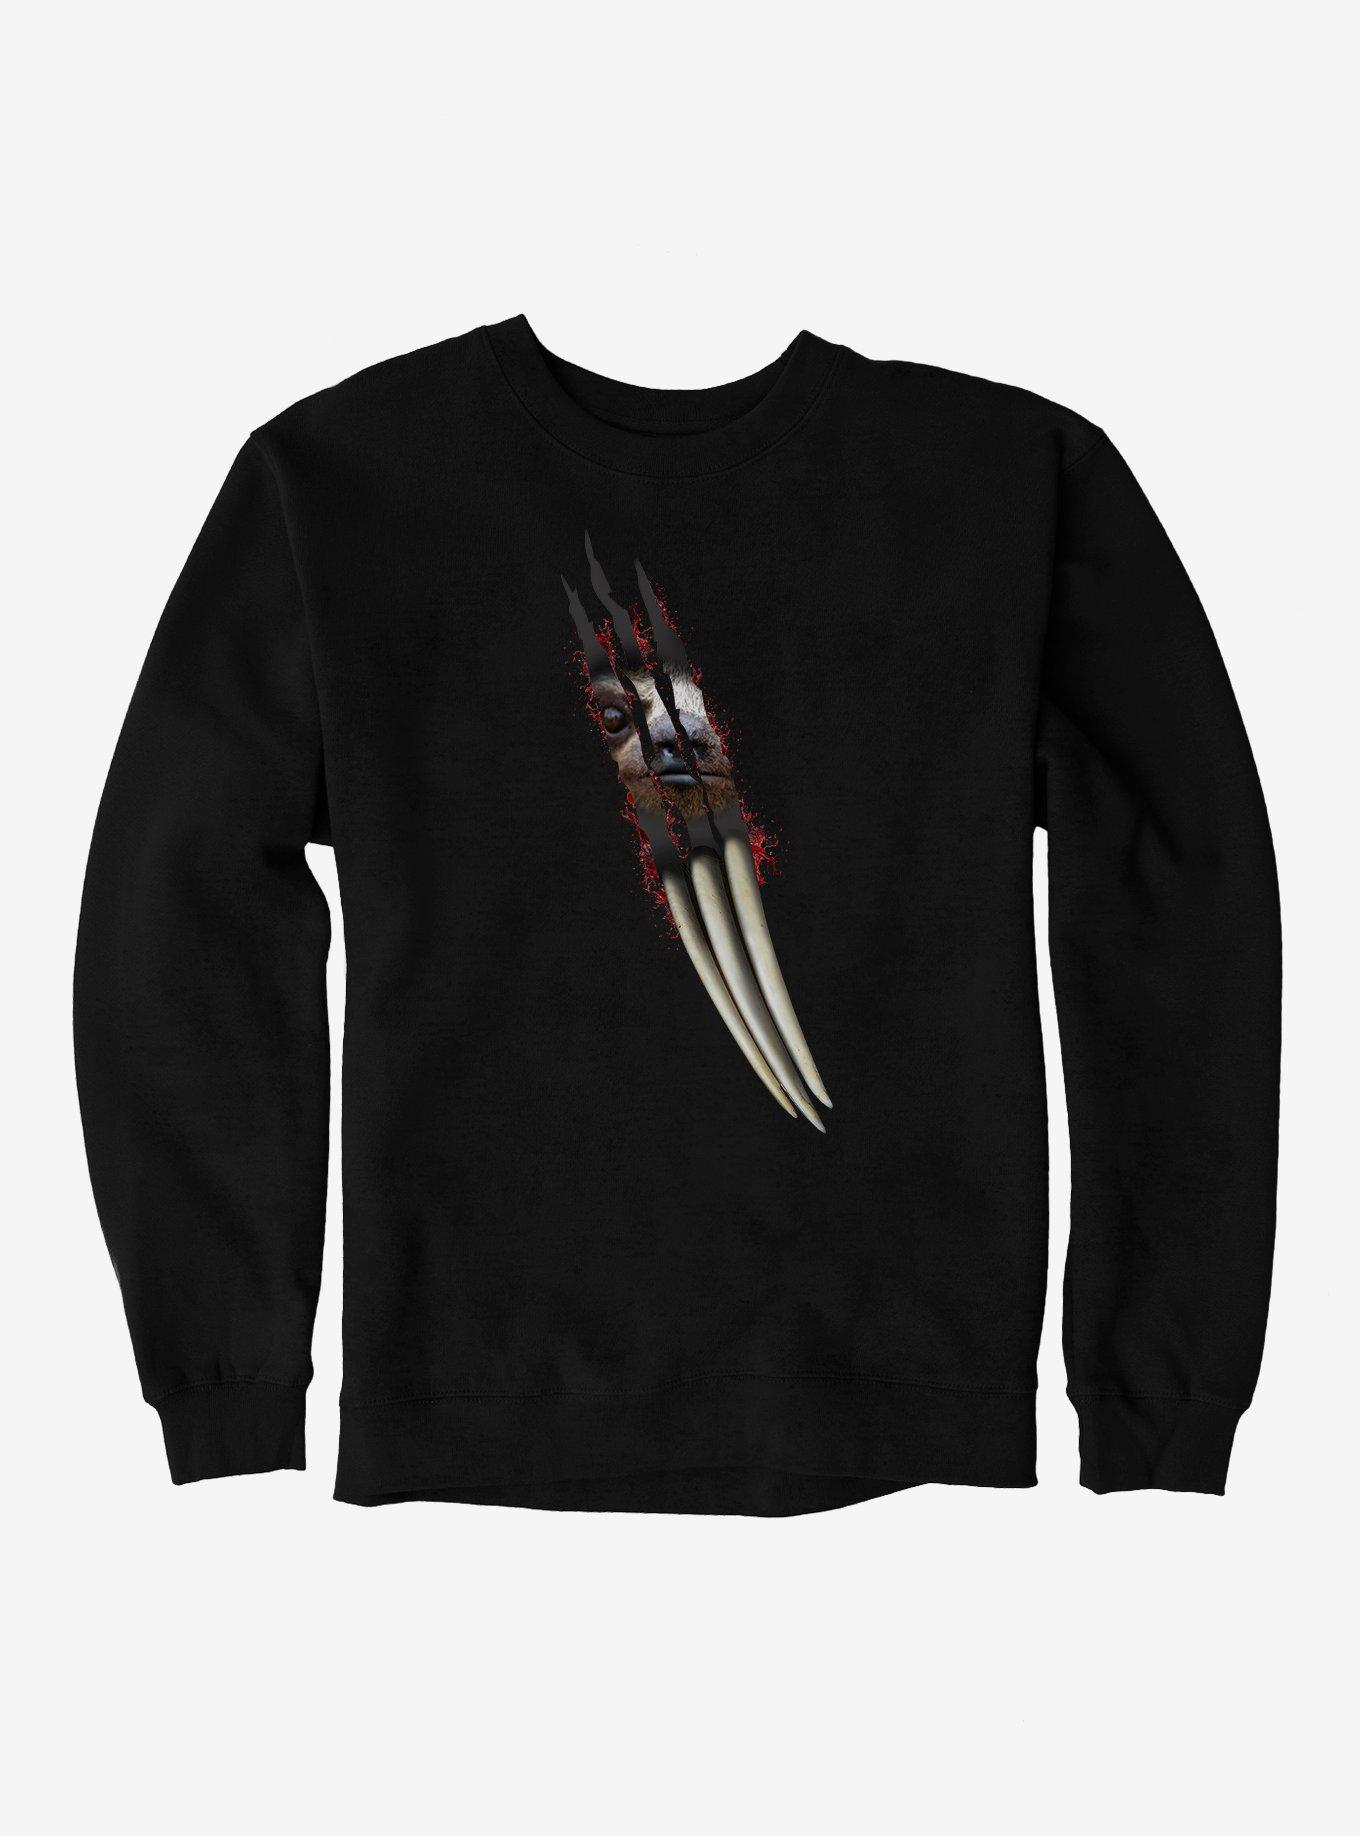 Hot Topic Scary Sloth Claws Sweatshirt